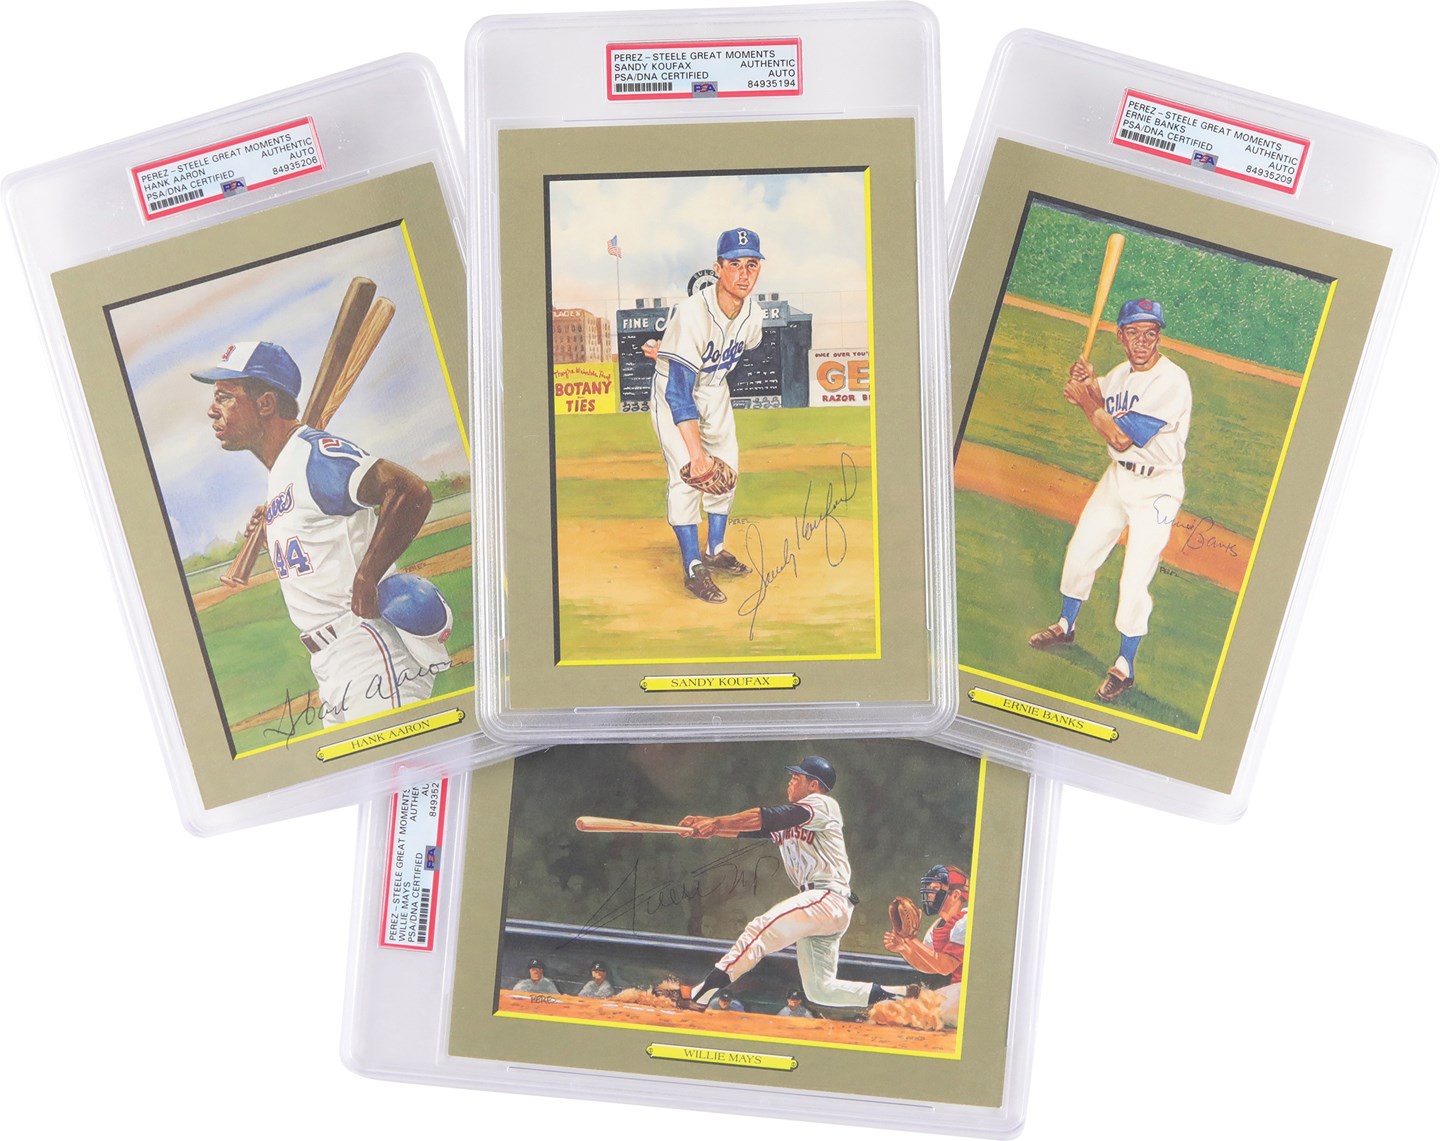 Baseball Autographs - Perez-Steele Great Moments Signed Card Collection (4) - Aaron, Mays, Koufax, & Banks